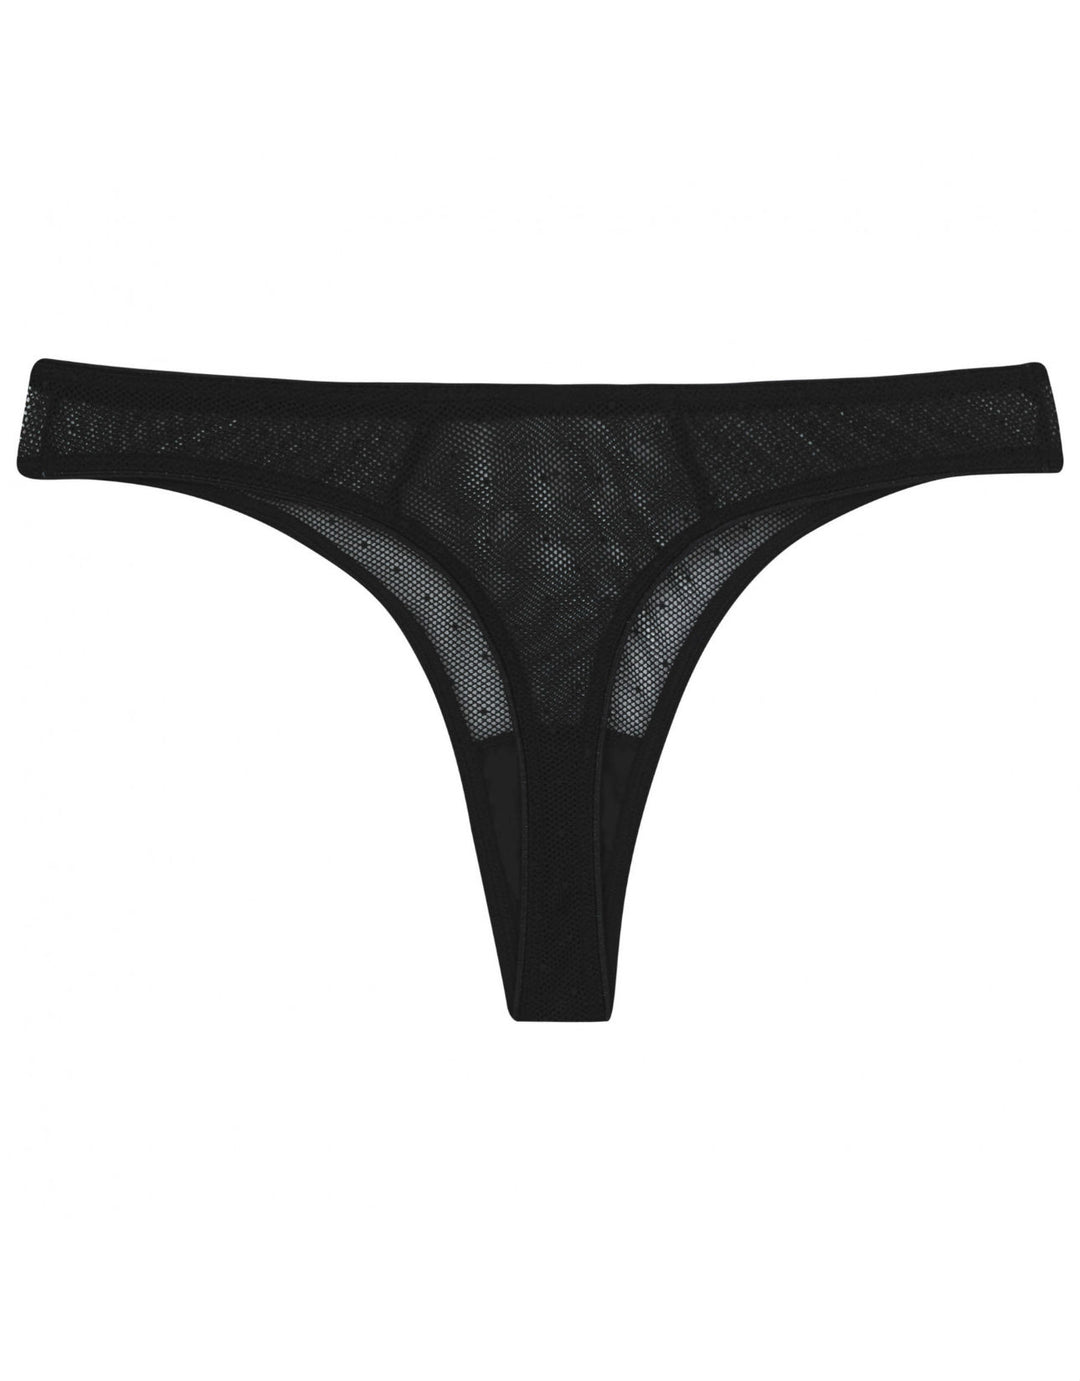 bodas-jabouley-black-lace-hipster-thong